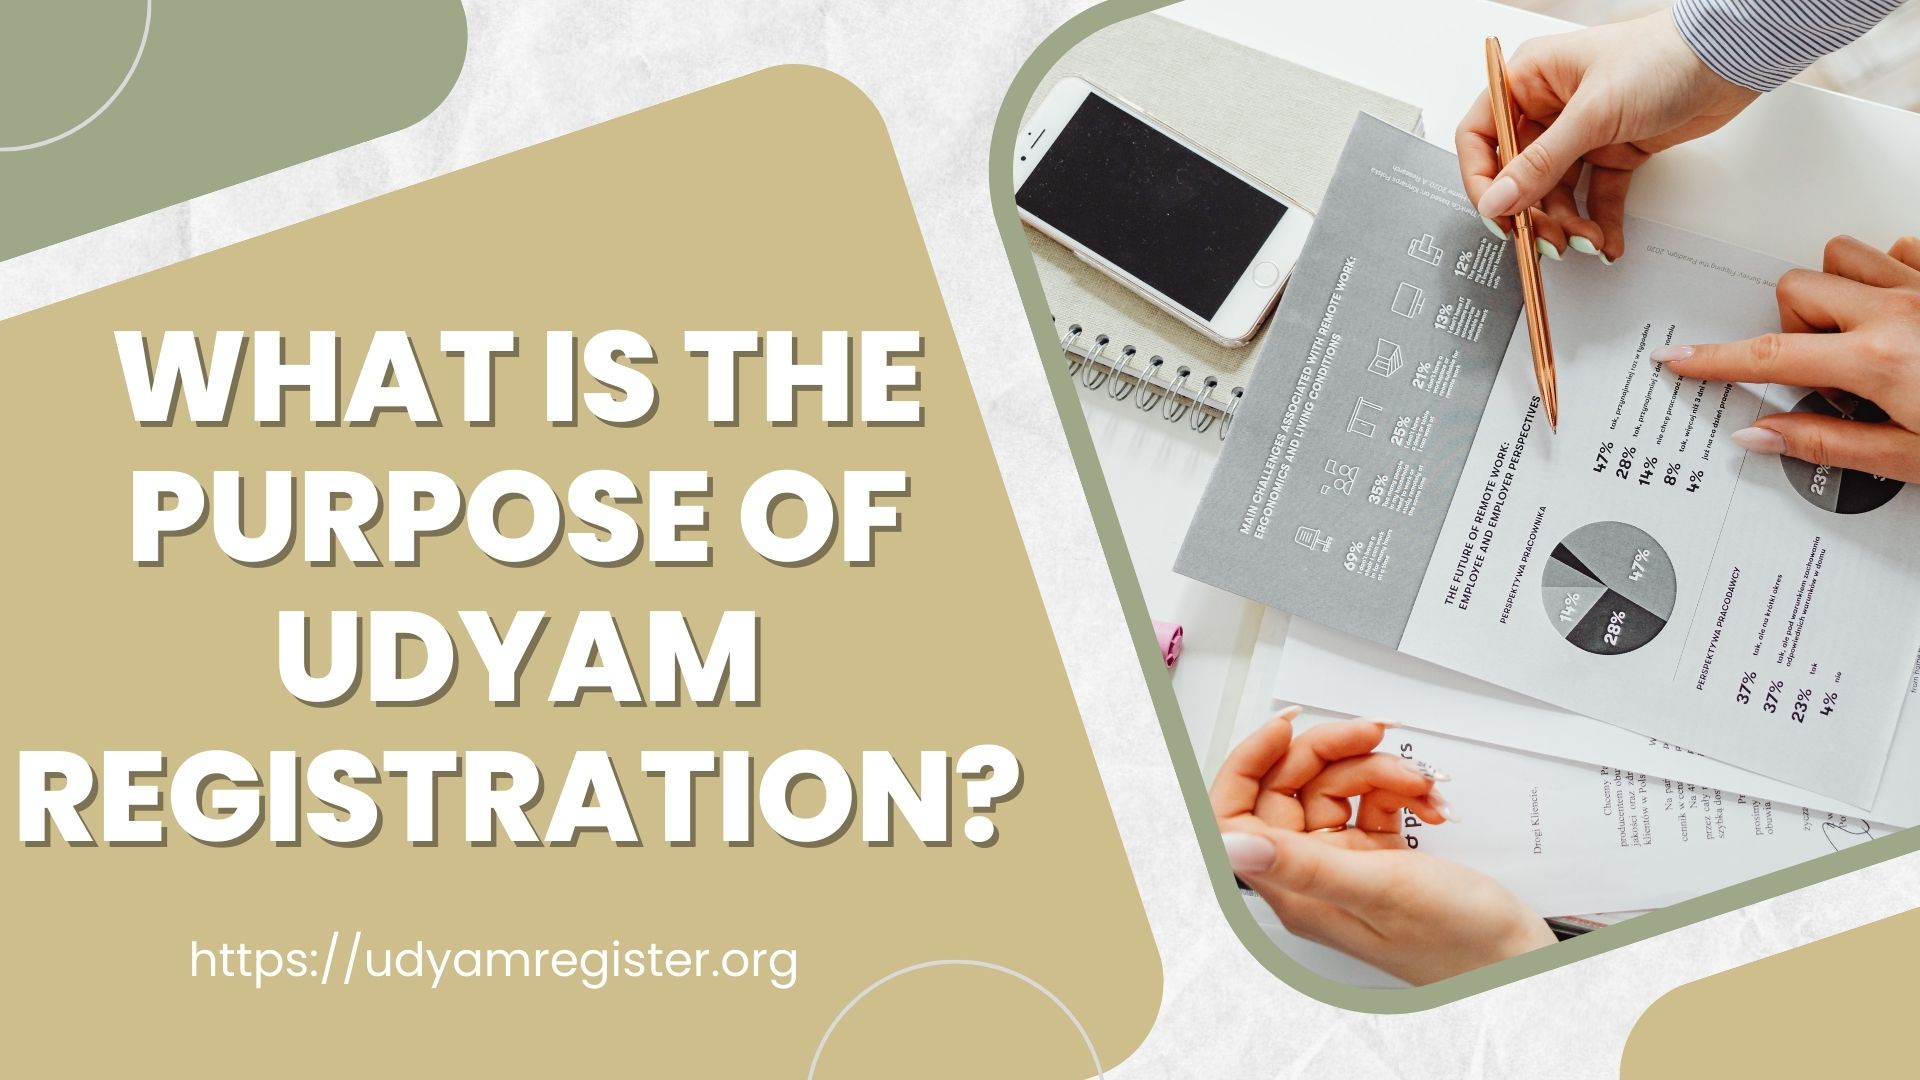 WHAT IS THE PURPOSE OF UDYAM REGISTRATION